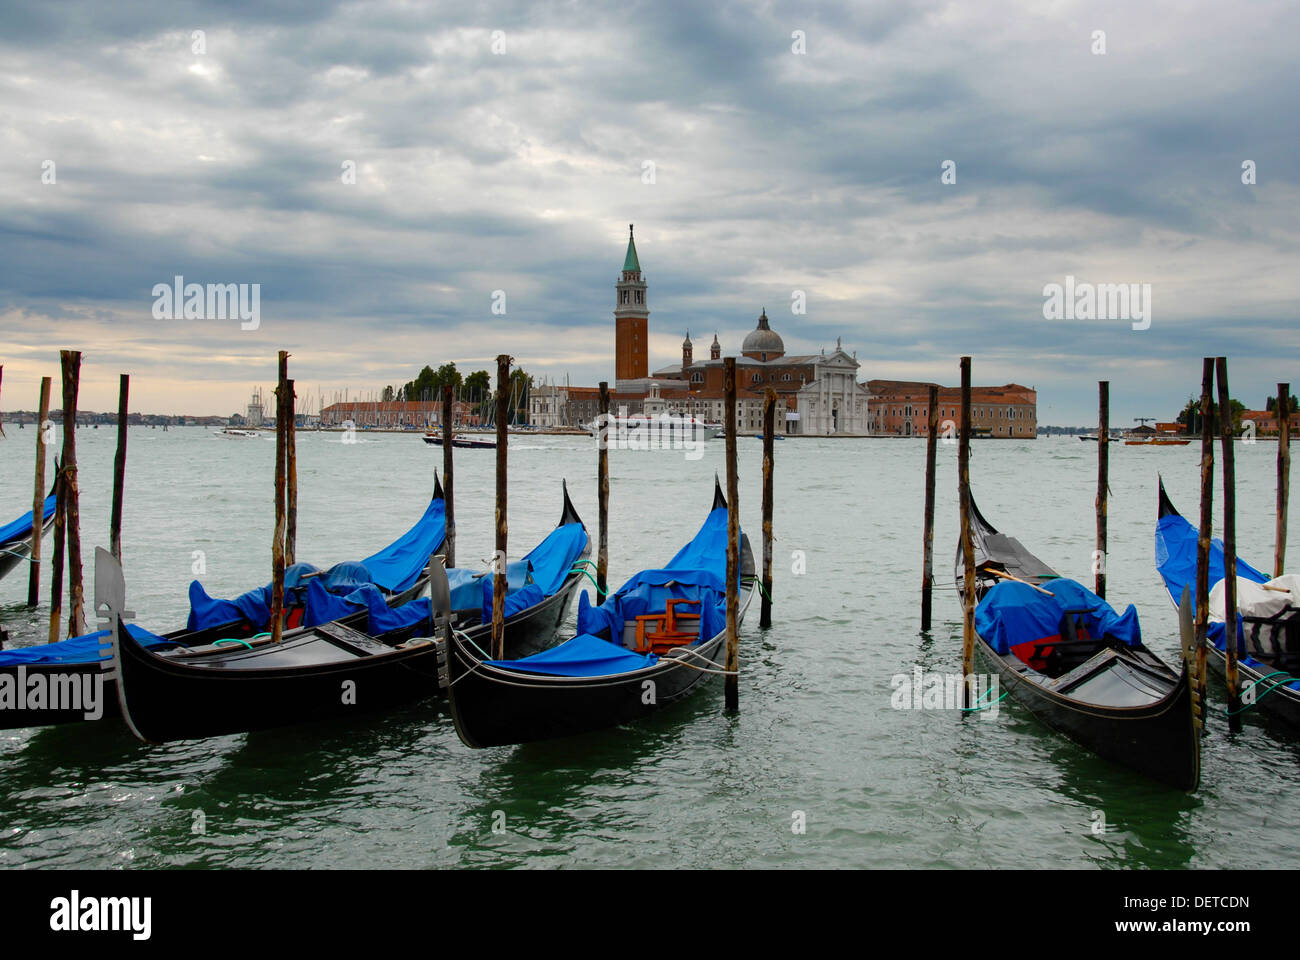 This is an image of Gondolas on the Grand Canal, Venice, Italy. Stock Photo